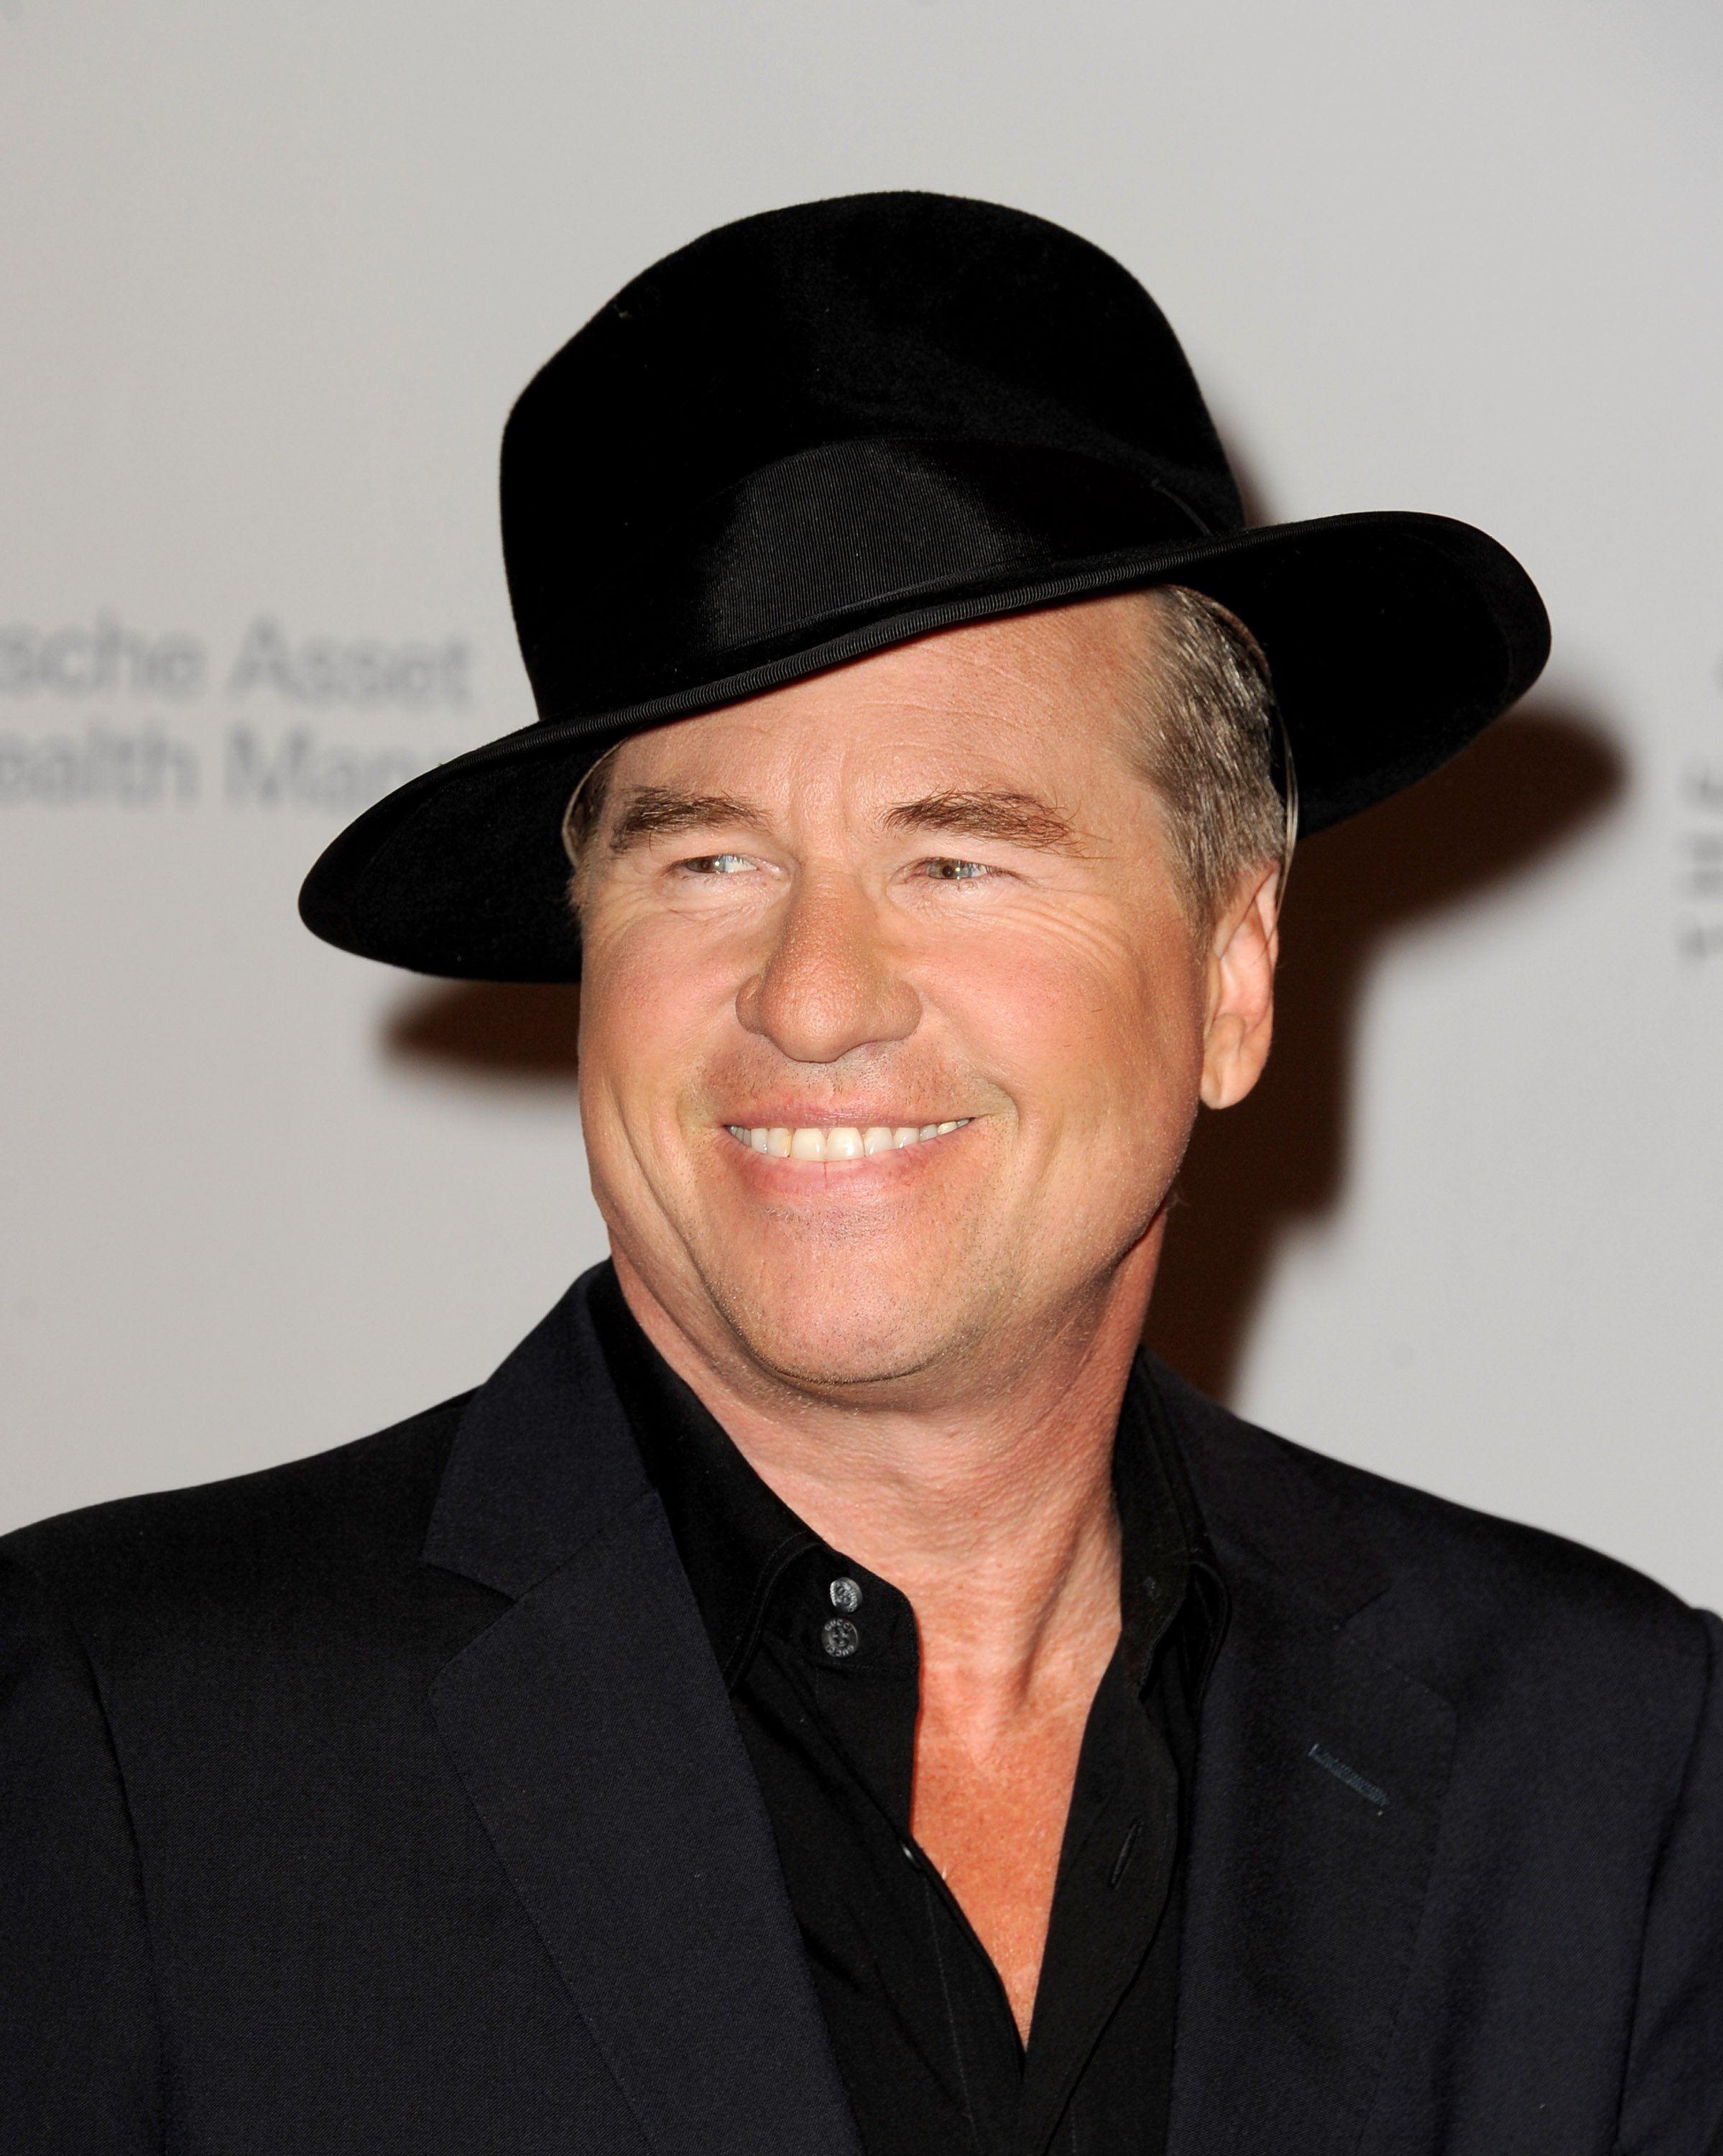 Val Kilmer arrives at the 23rd Annual Simply Shakespeare Benefit reading of "The Two Gentleman of Verona" at The Broad Stage on September 25, 2013, in Santa Monica, California. | Source: Getty Images.